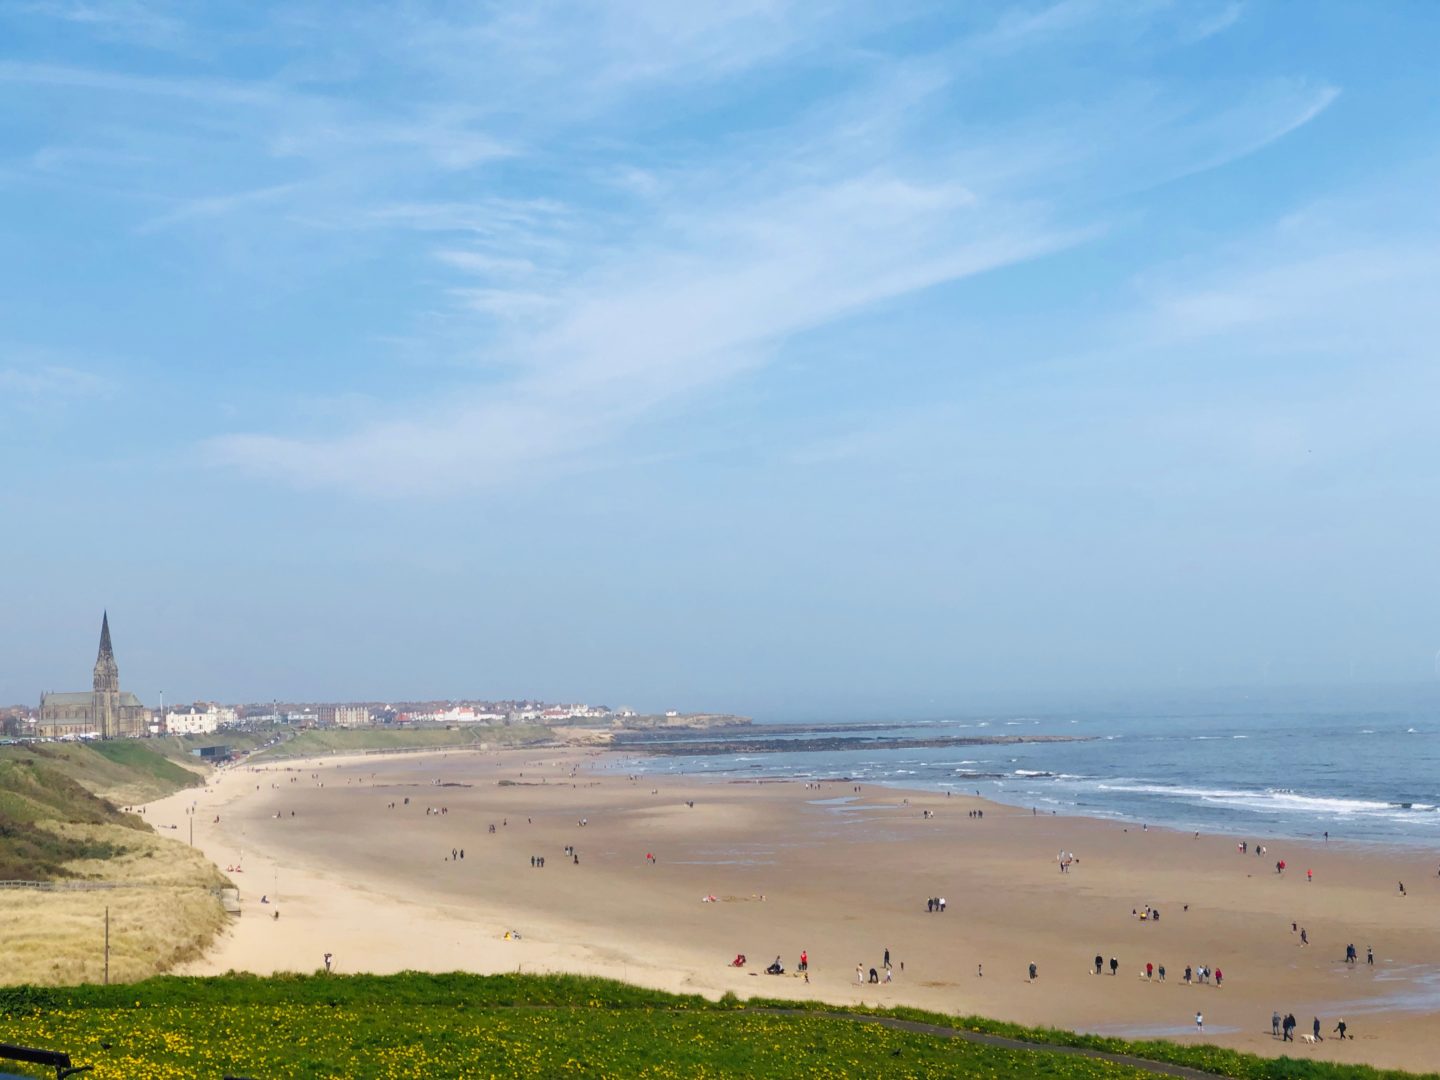 AD: A day out at Whitley Bay with Stagecoach's the Seasider open top bus service